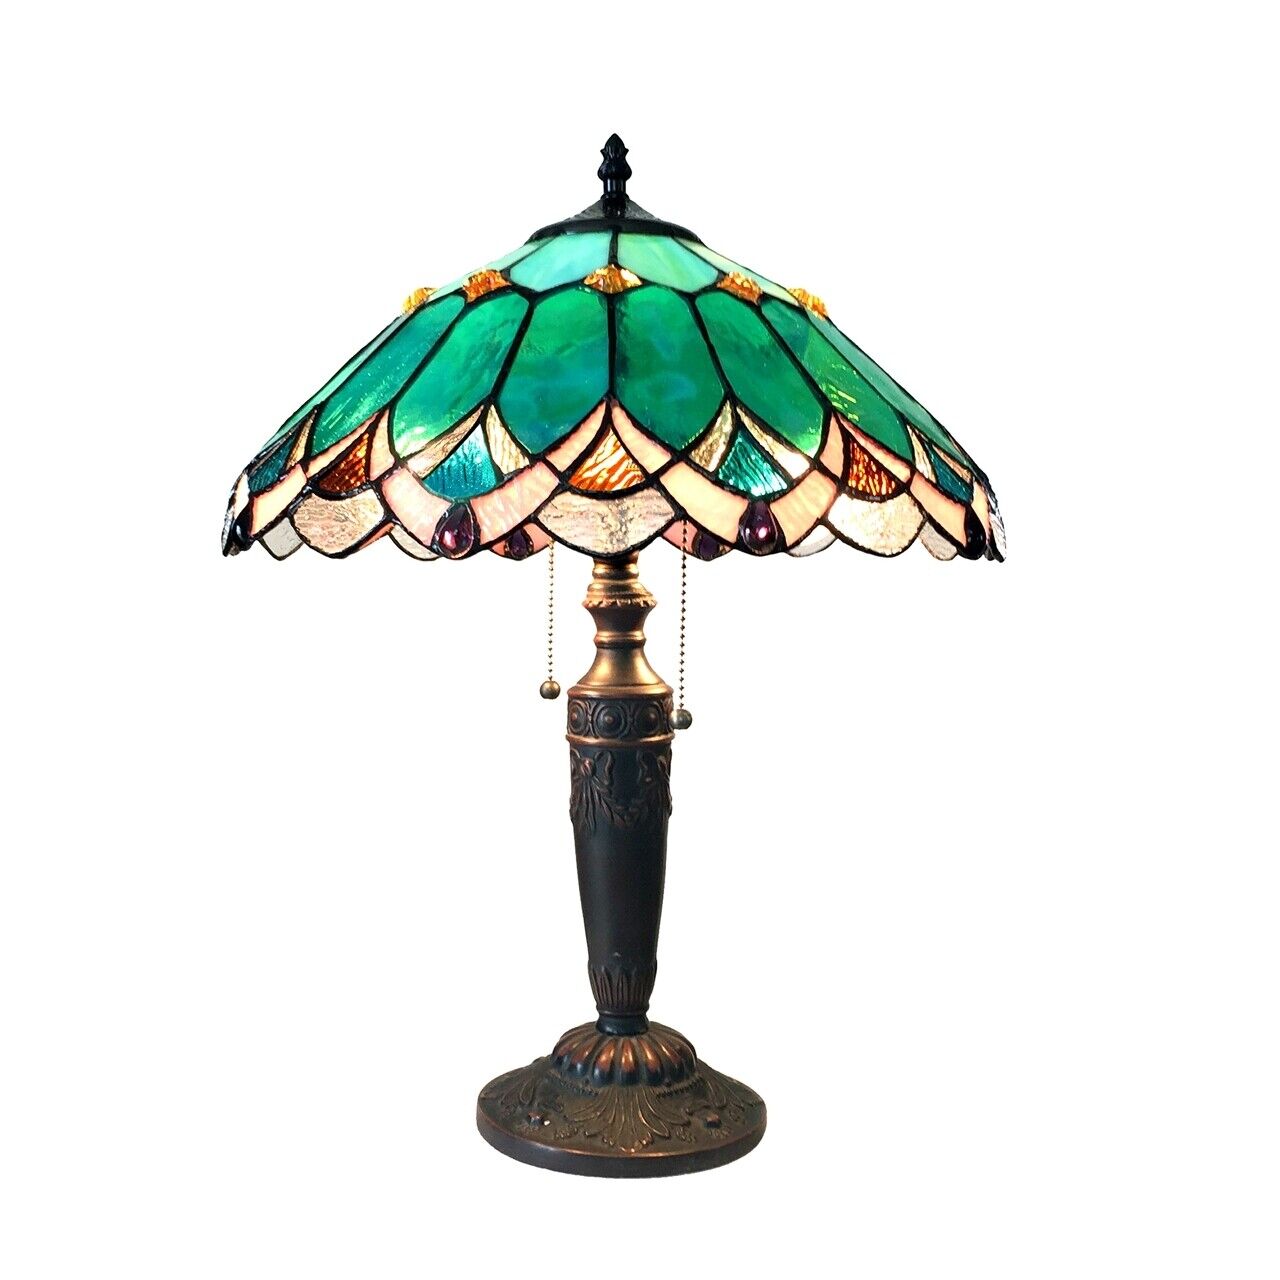 21" Stained Glass Table Lamp